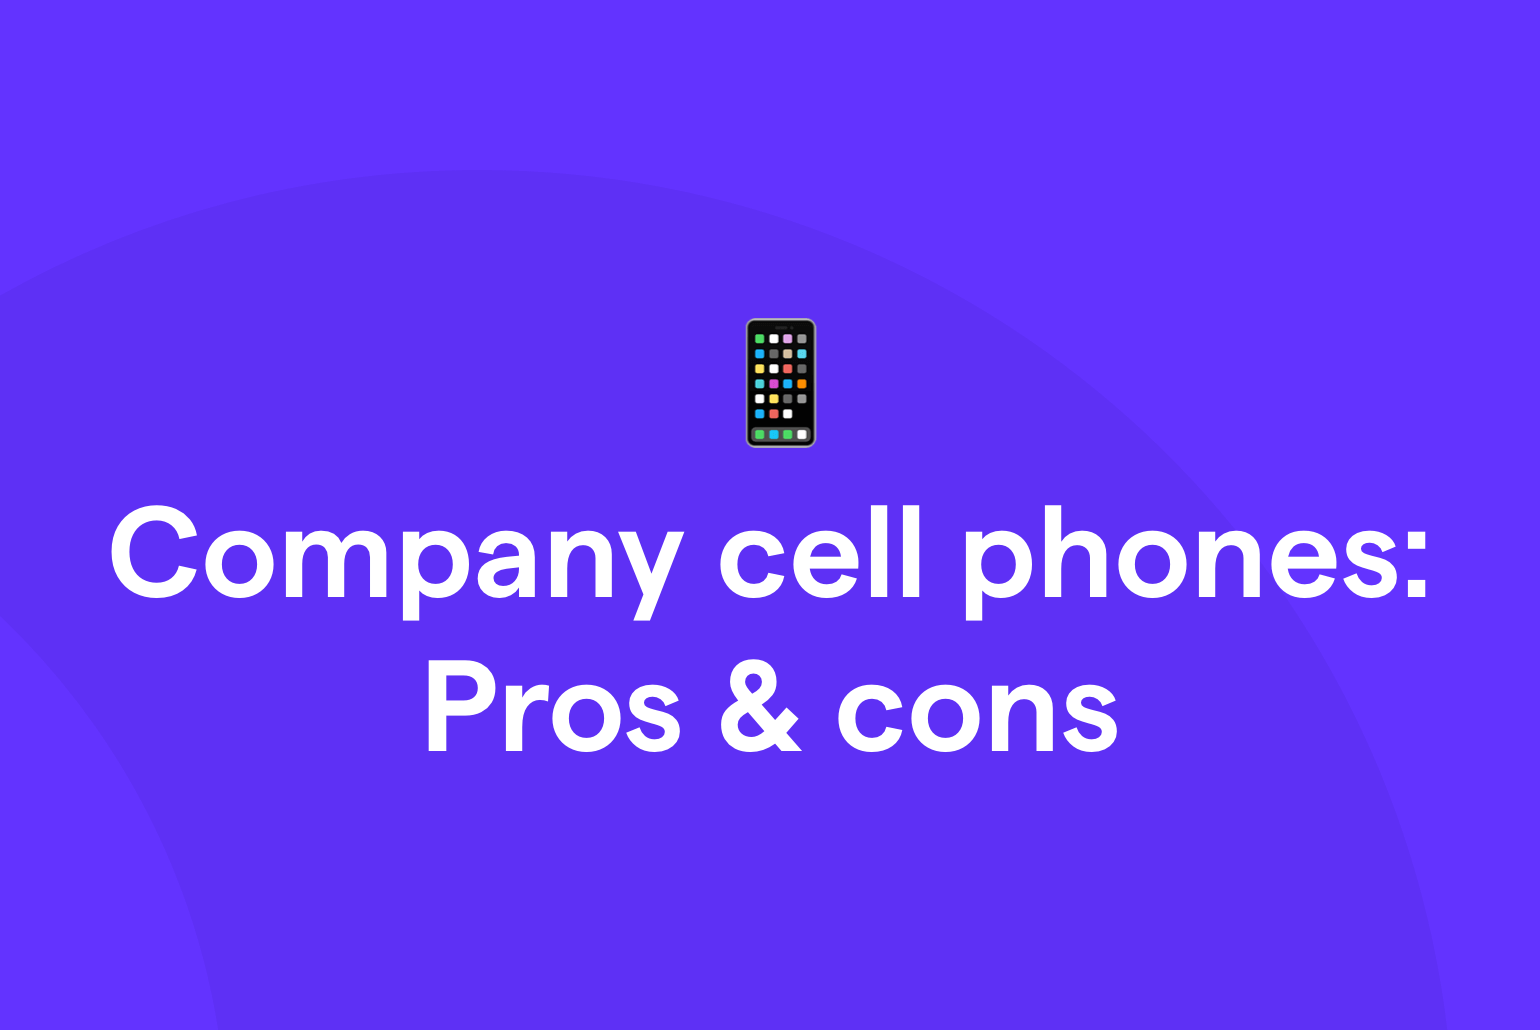 Company cell phones: Pros and cons